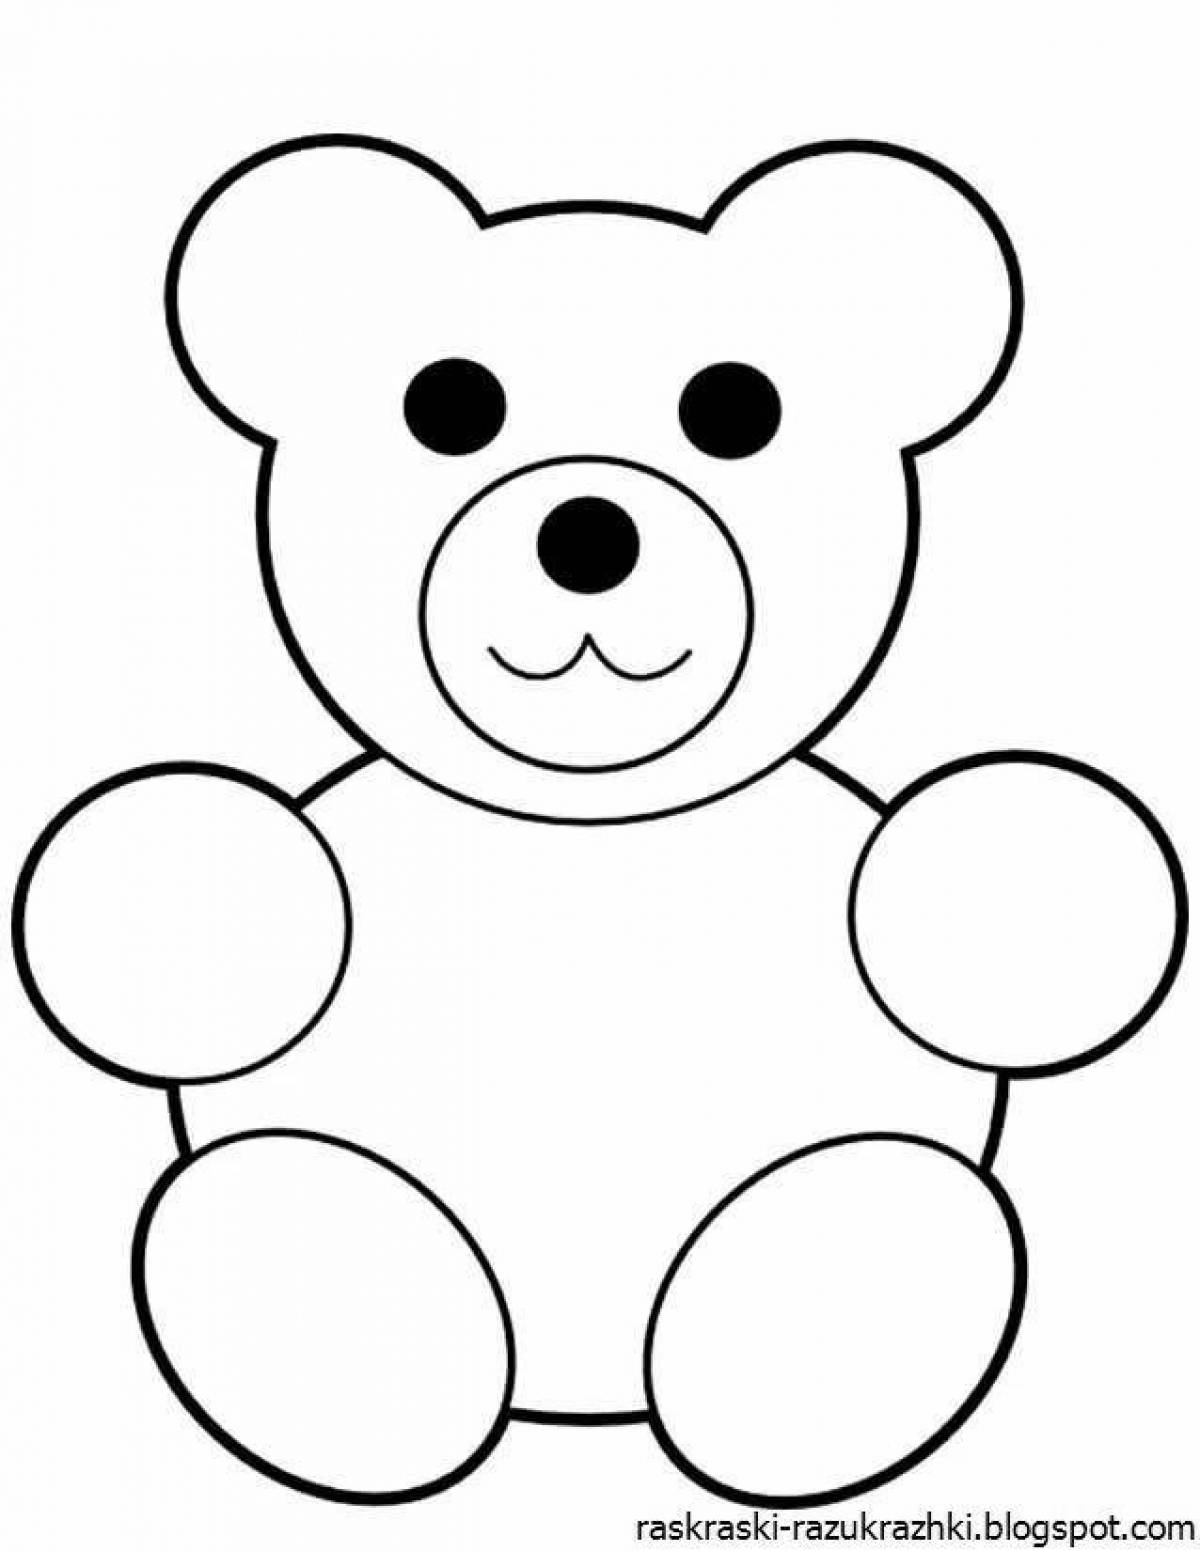 Color-frenzy coloring page bear for children 3-4 years old